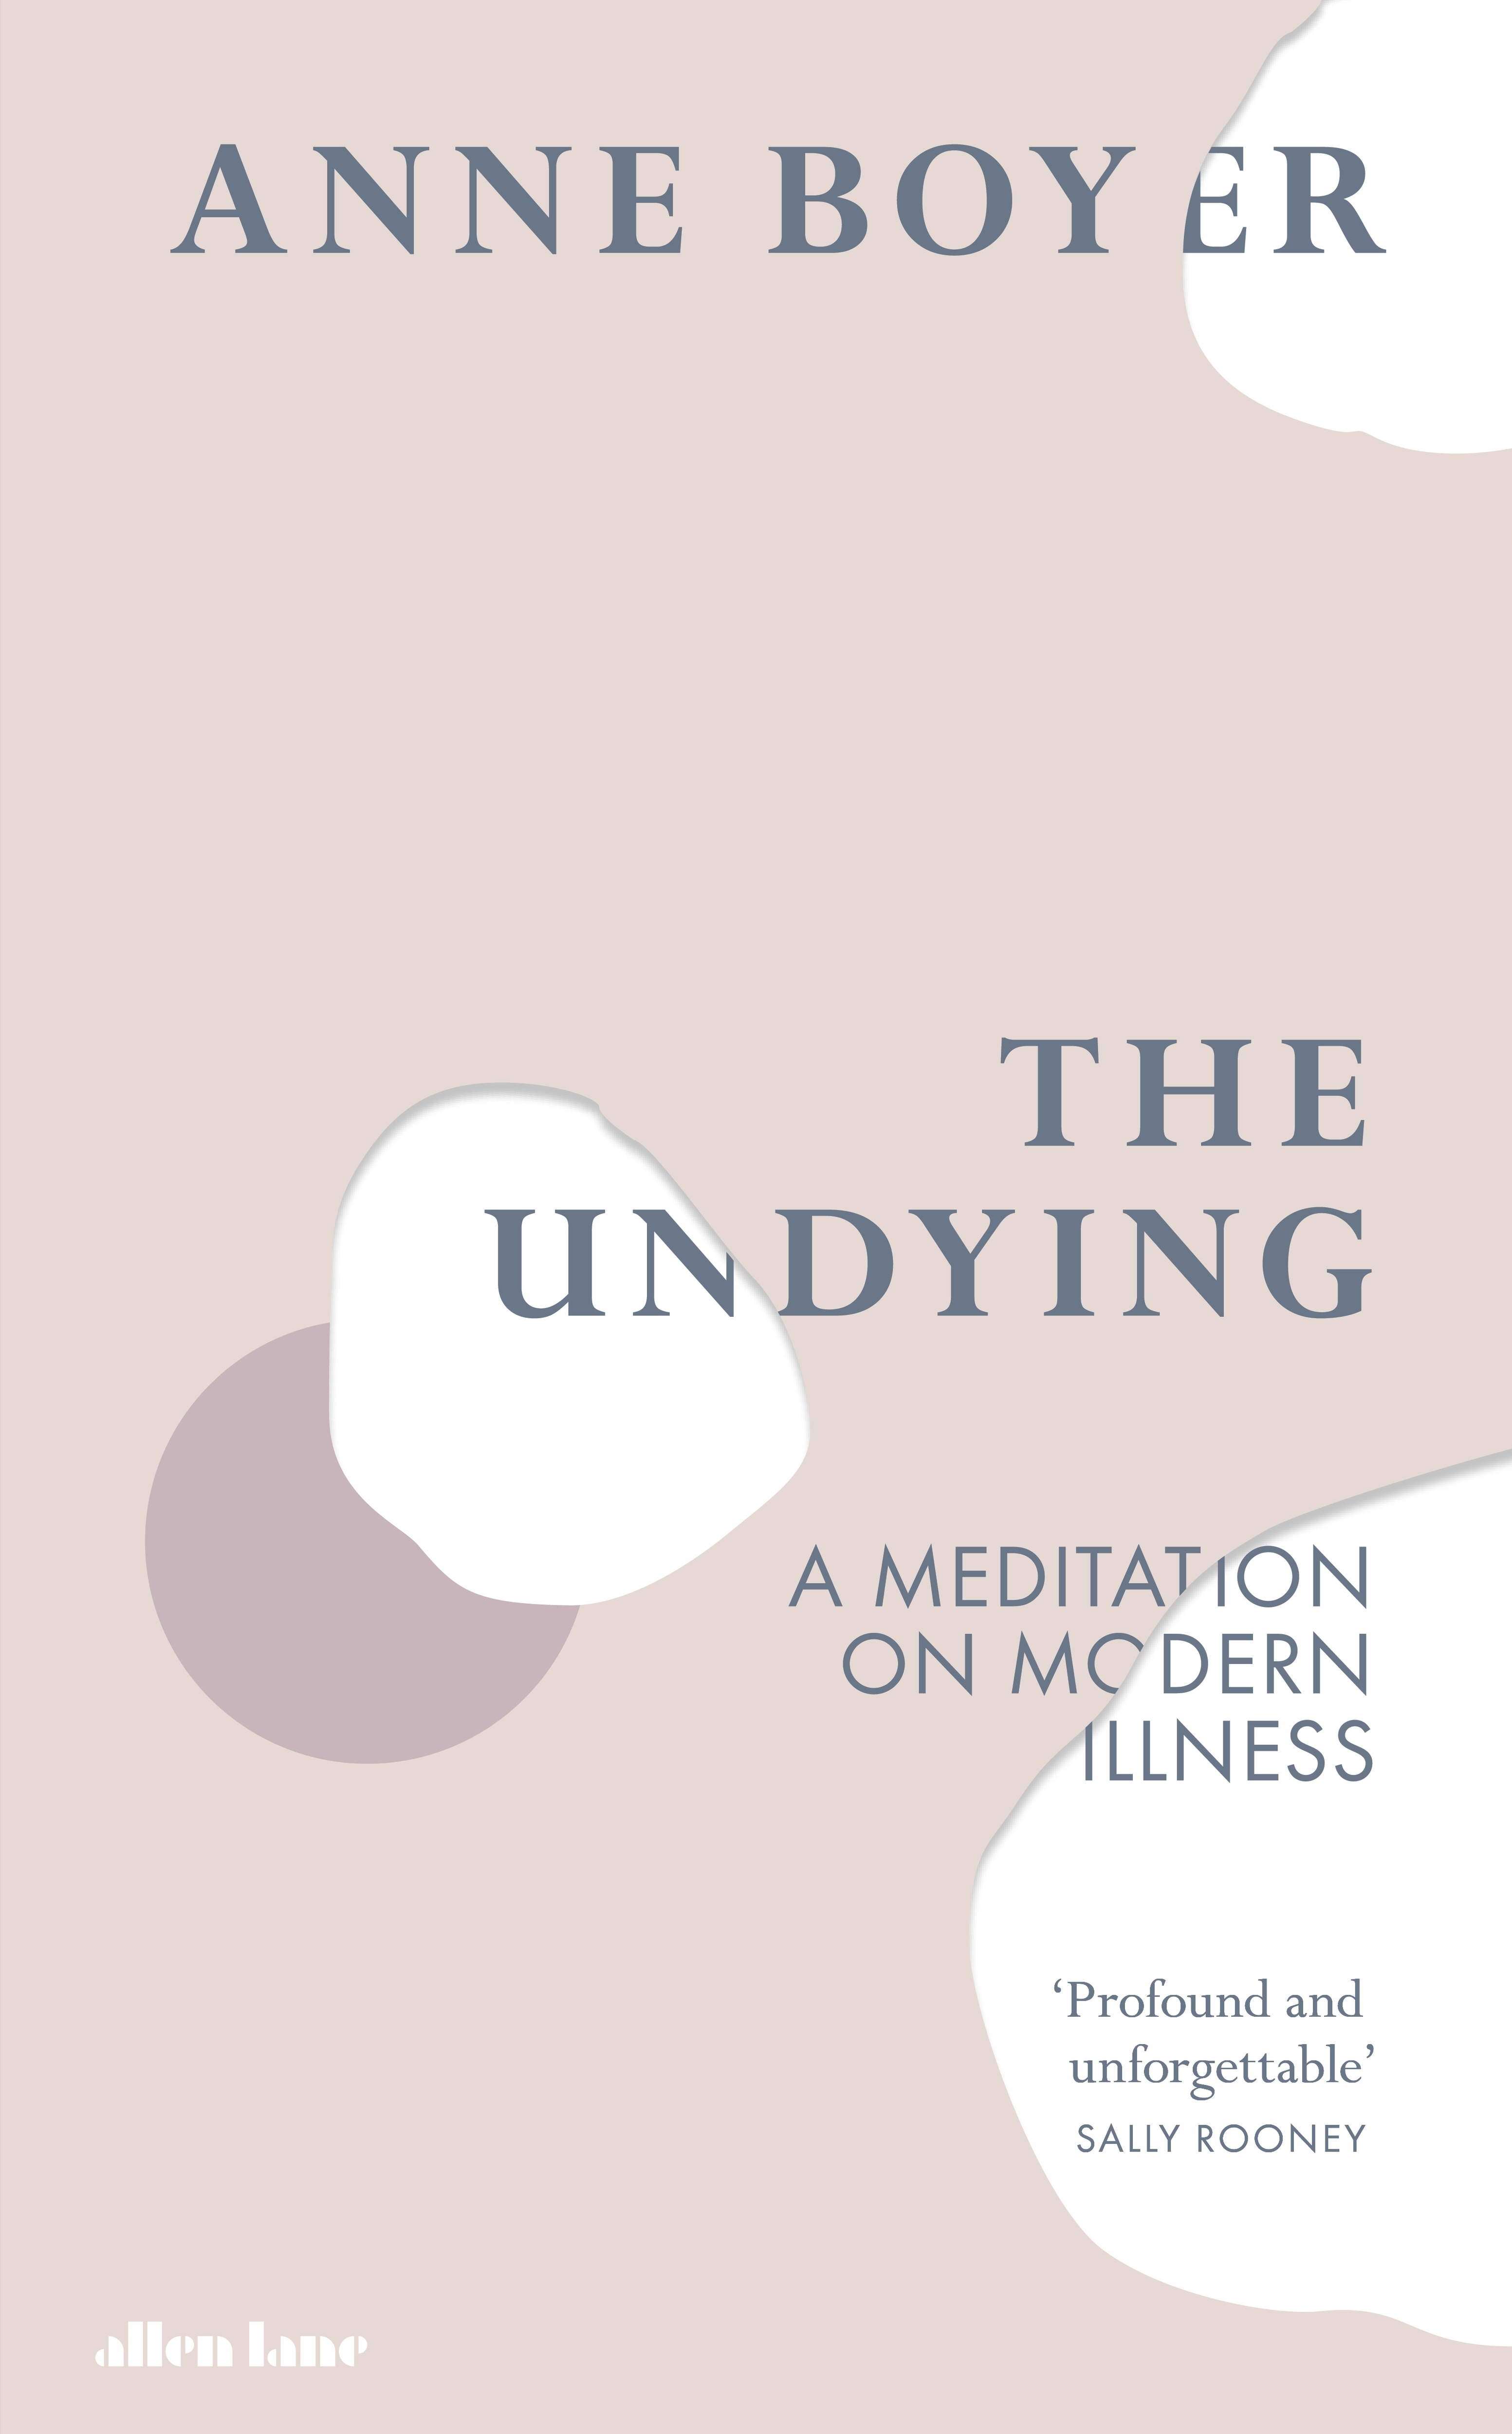 Book “The Undying” by Anne Boyer — September 17, 2019